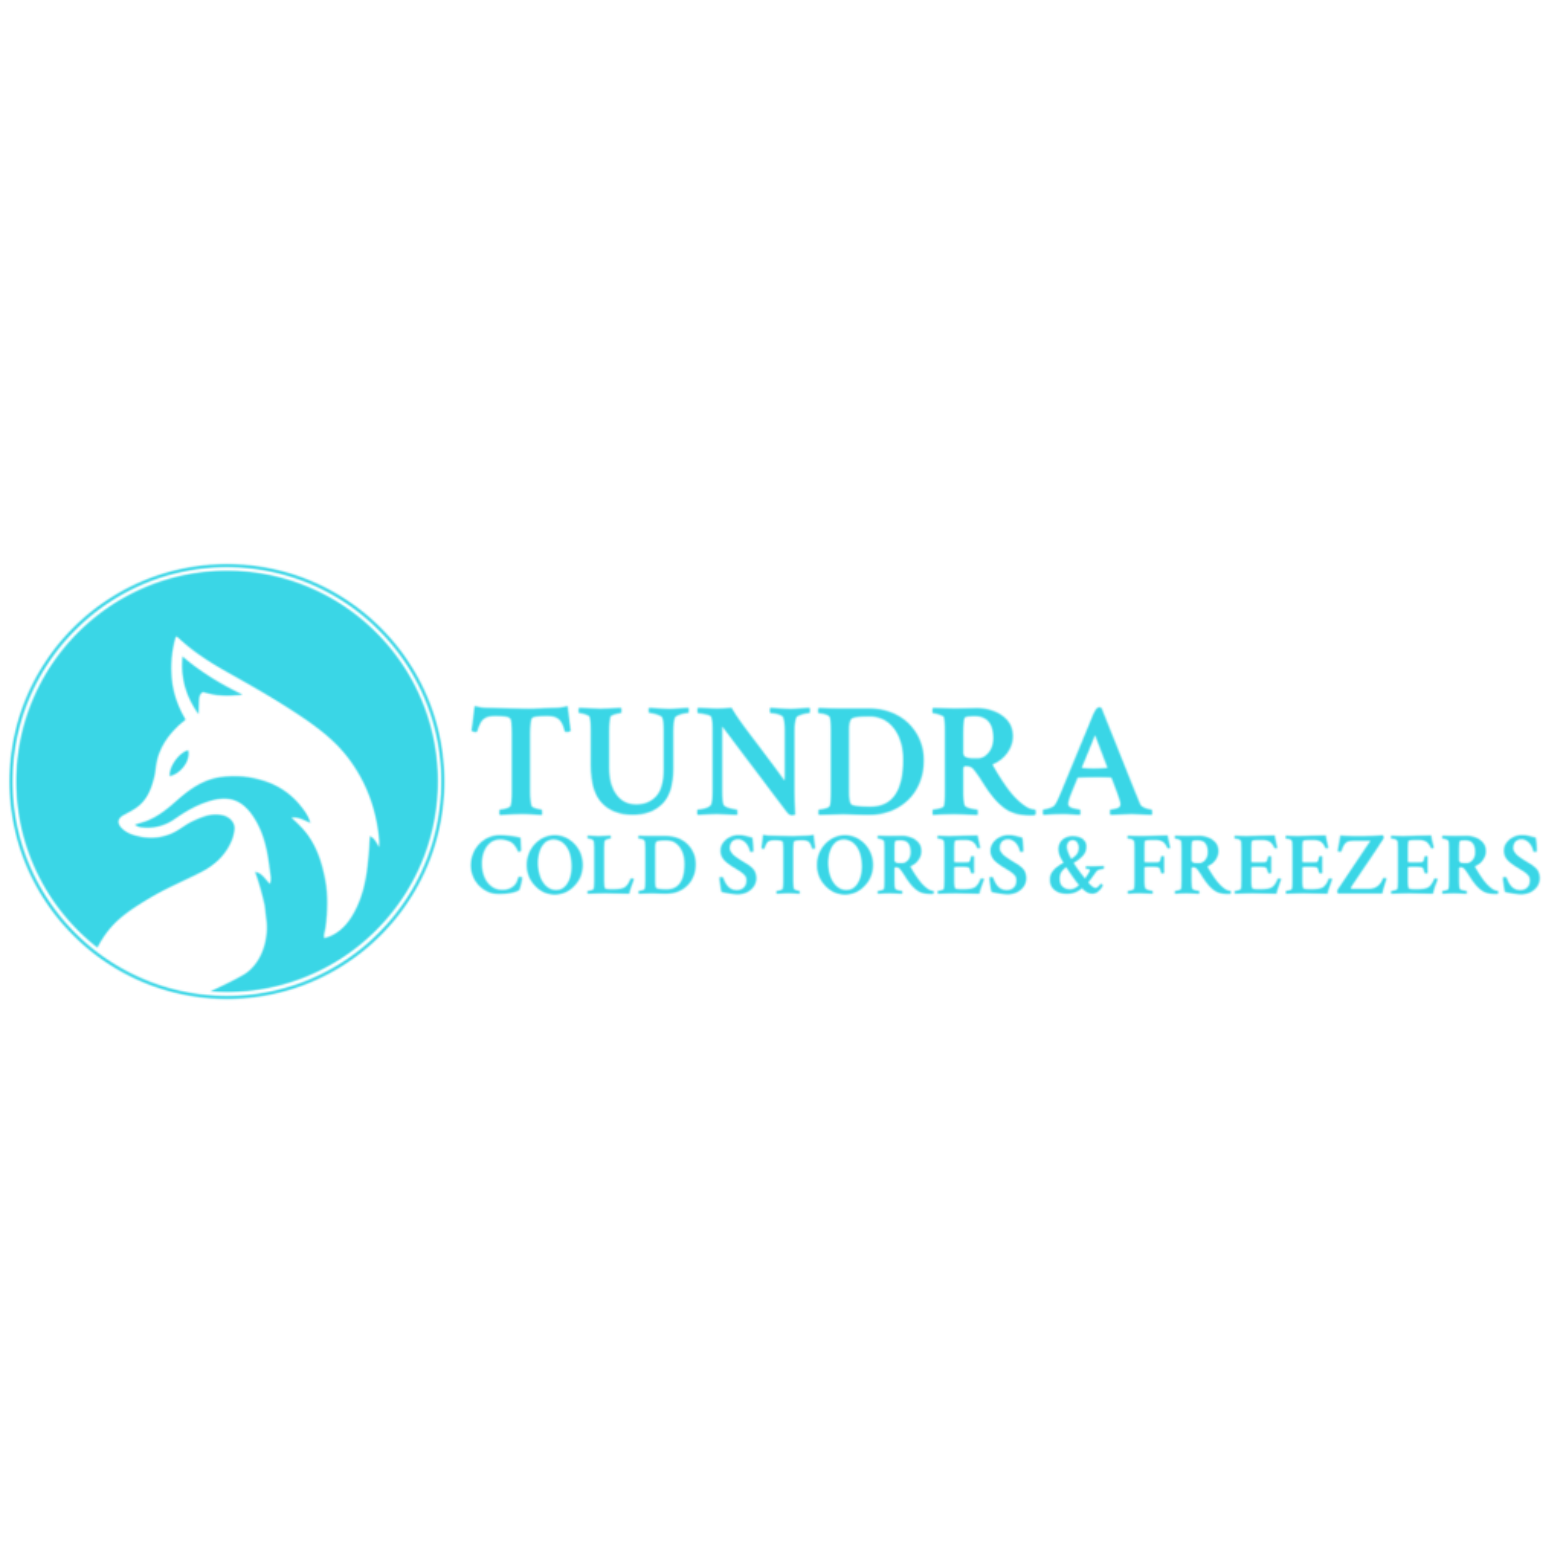 Tundra Cold Stores & Freezers